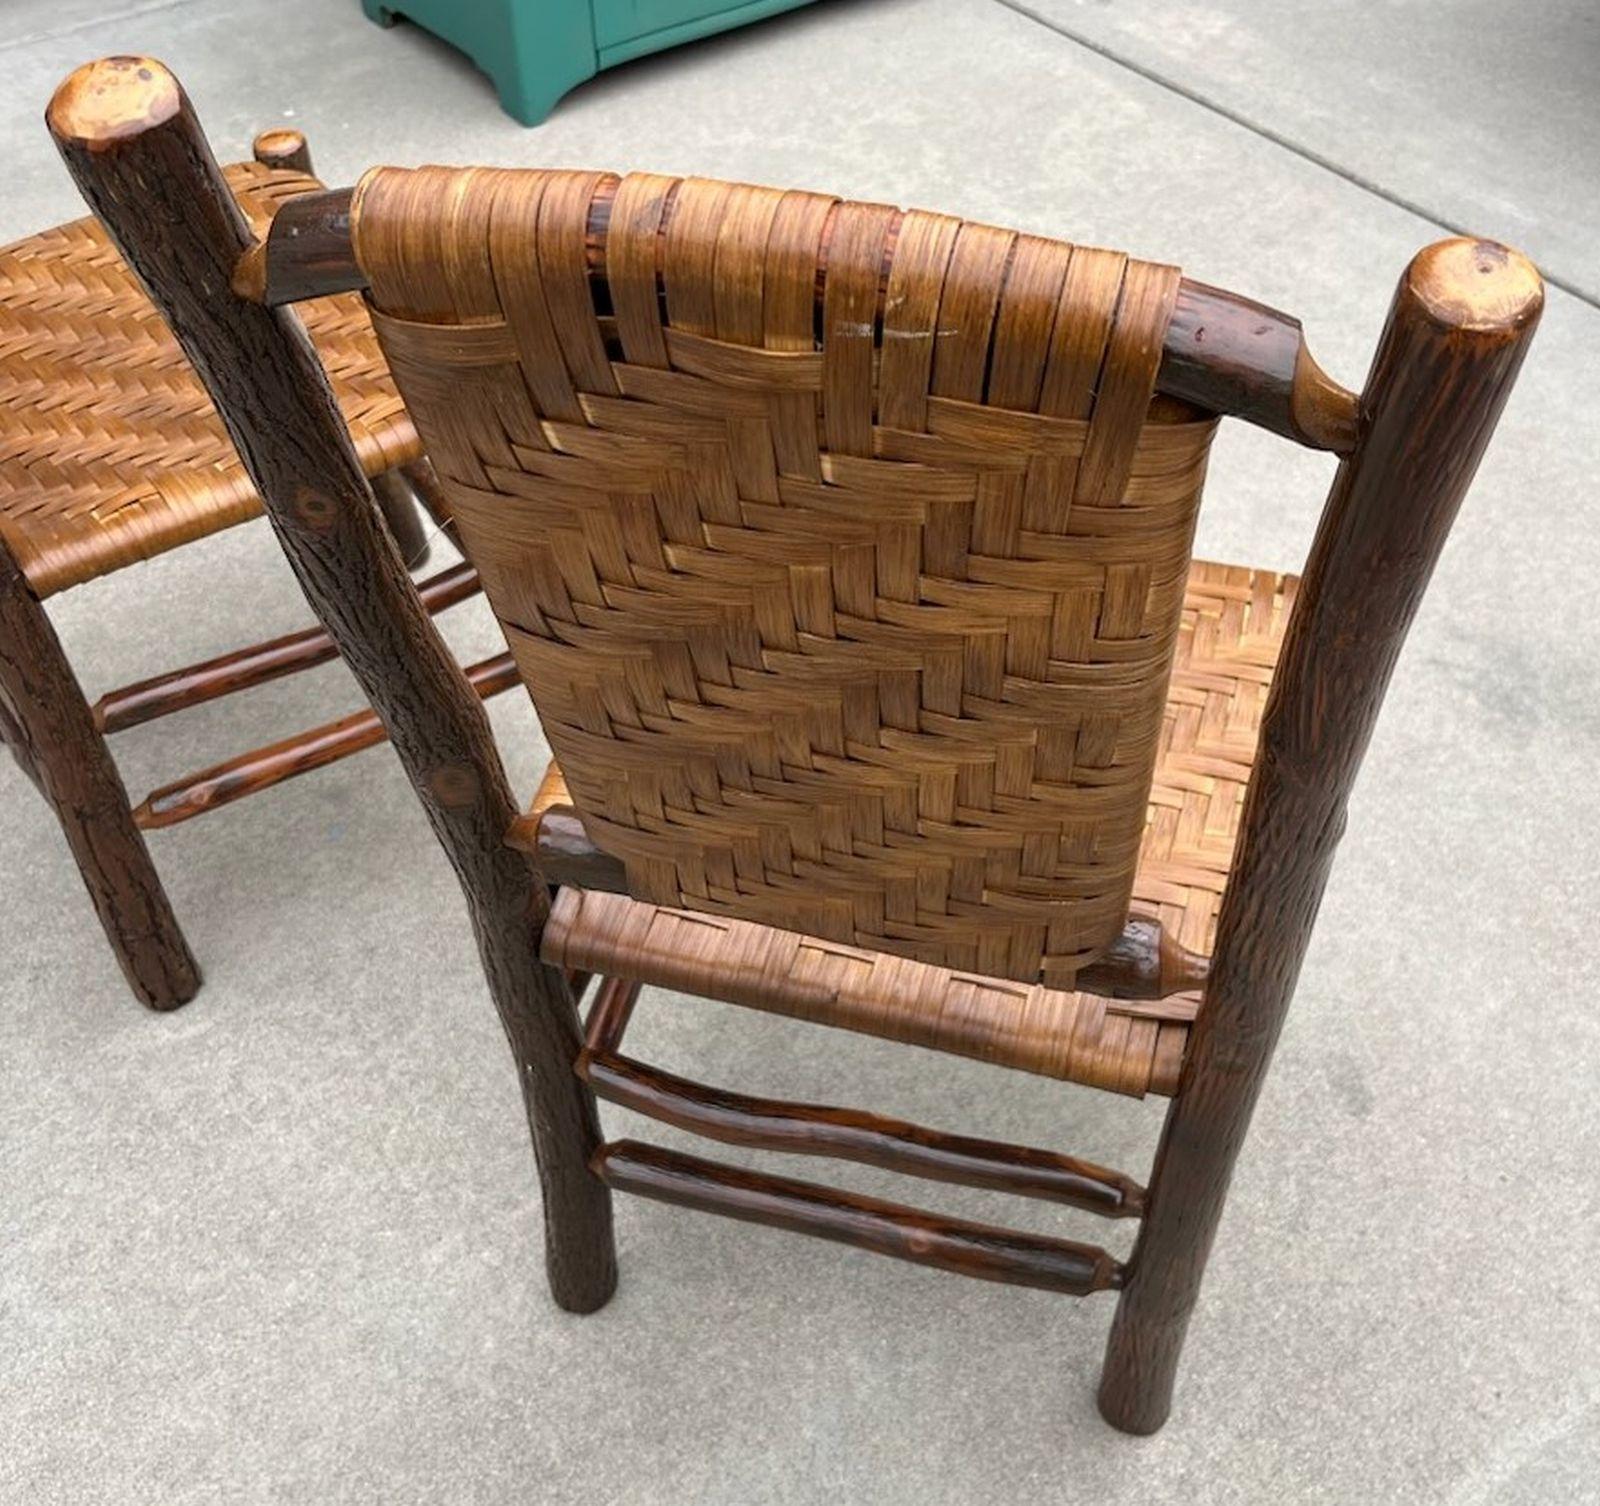 Mid-20th Century Pair of Old hickory Chairs w/ Original Woven Back and Seat